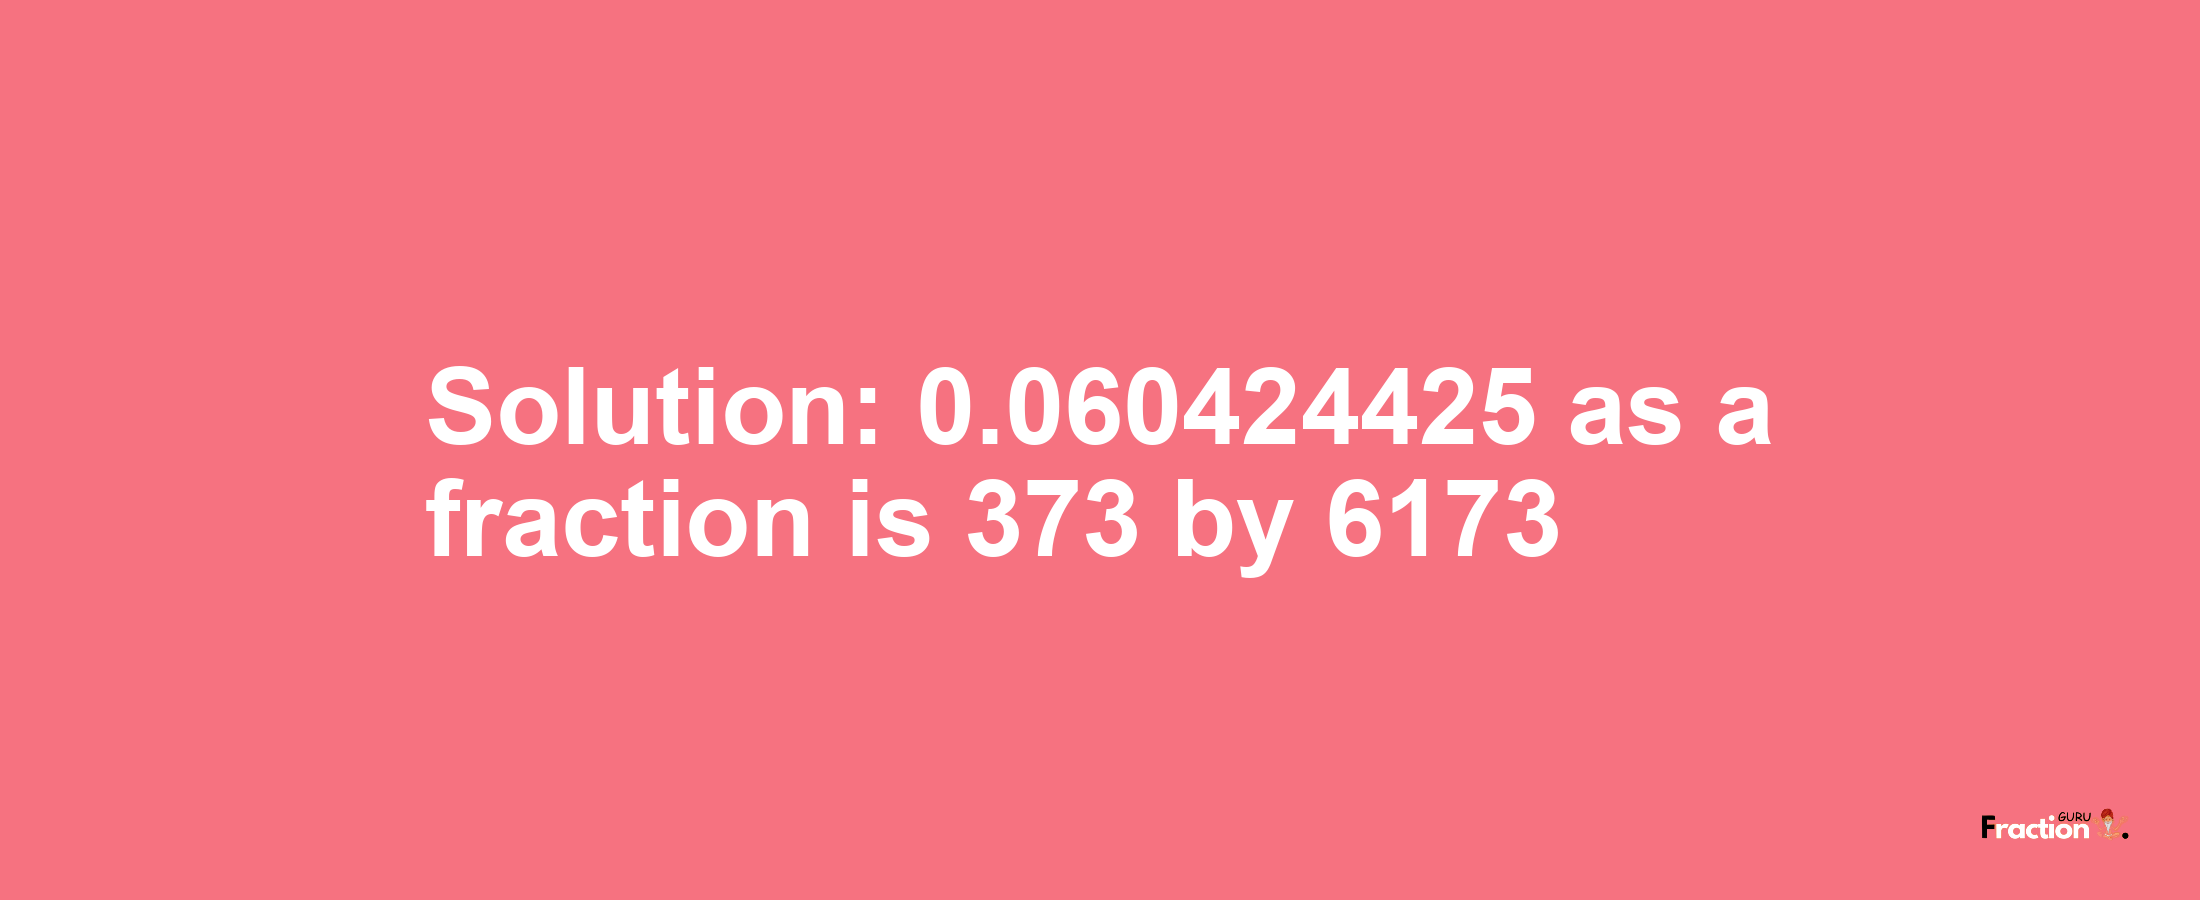 Solution:0.060424425 as a fraction is 373/6173